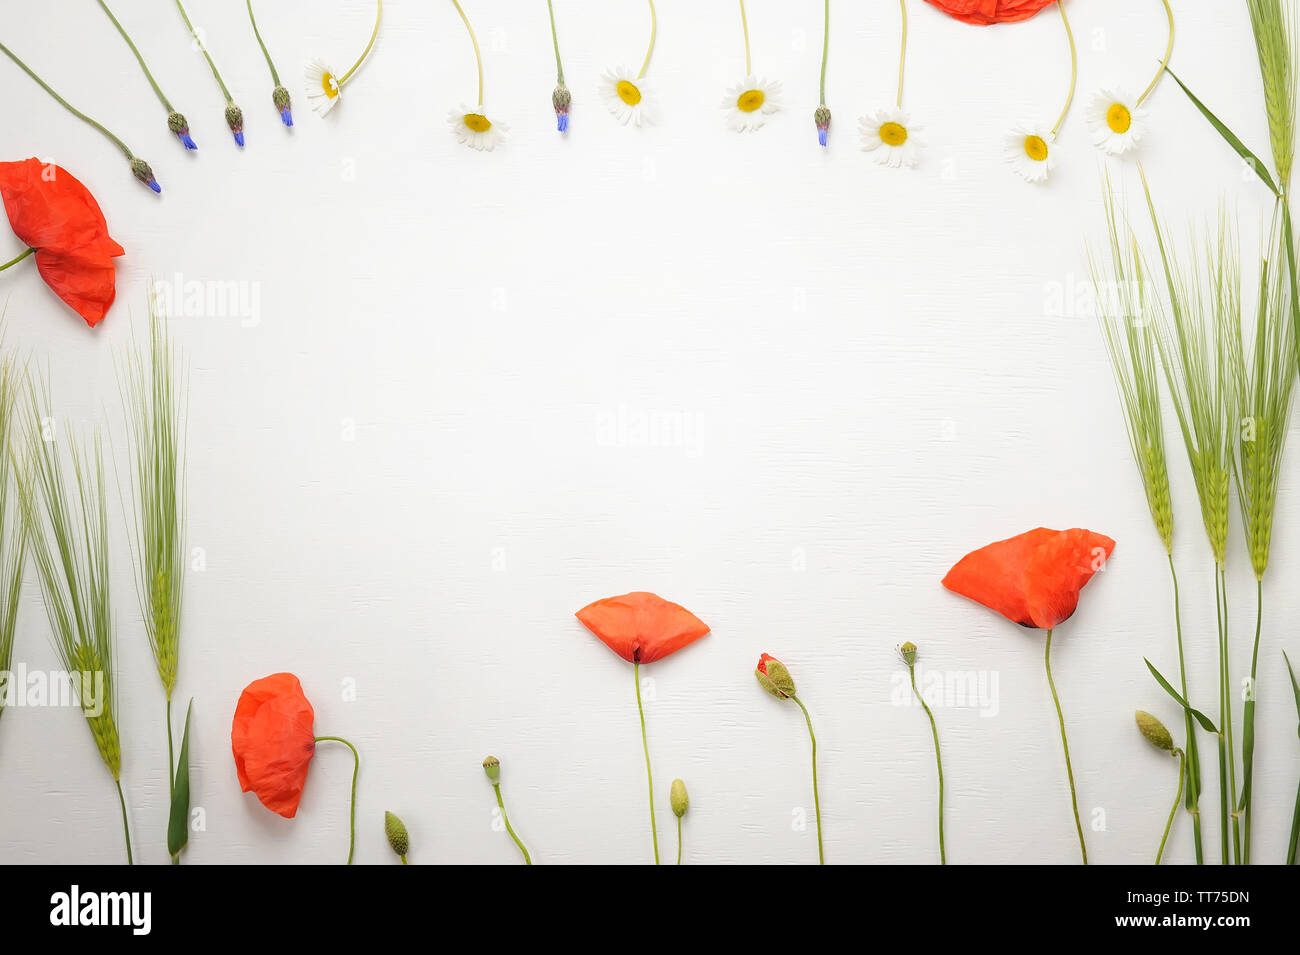 Blossom of poppies, green rye,chamomile,cornflowers  over  white textured background . Image with copy space, top view for lettering, text or design. Stock Photo